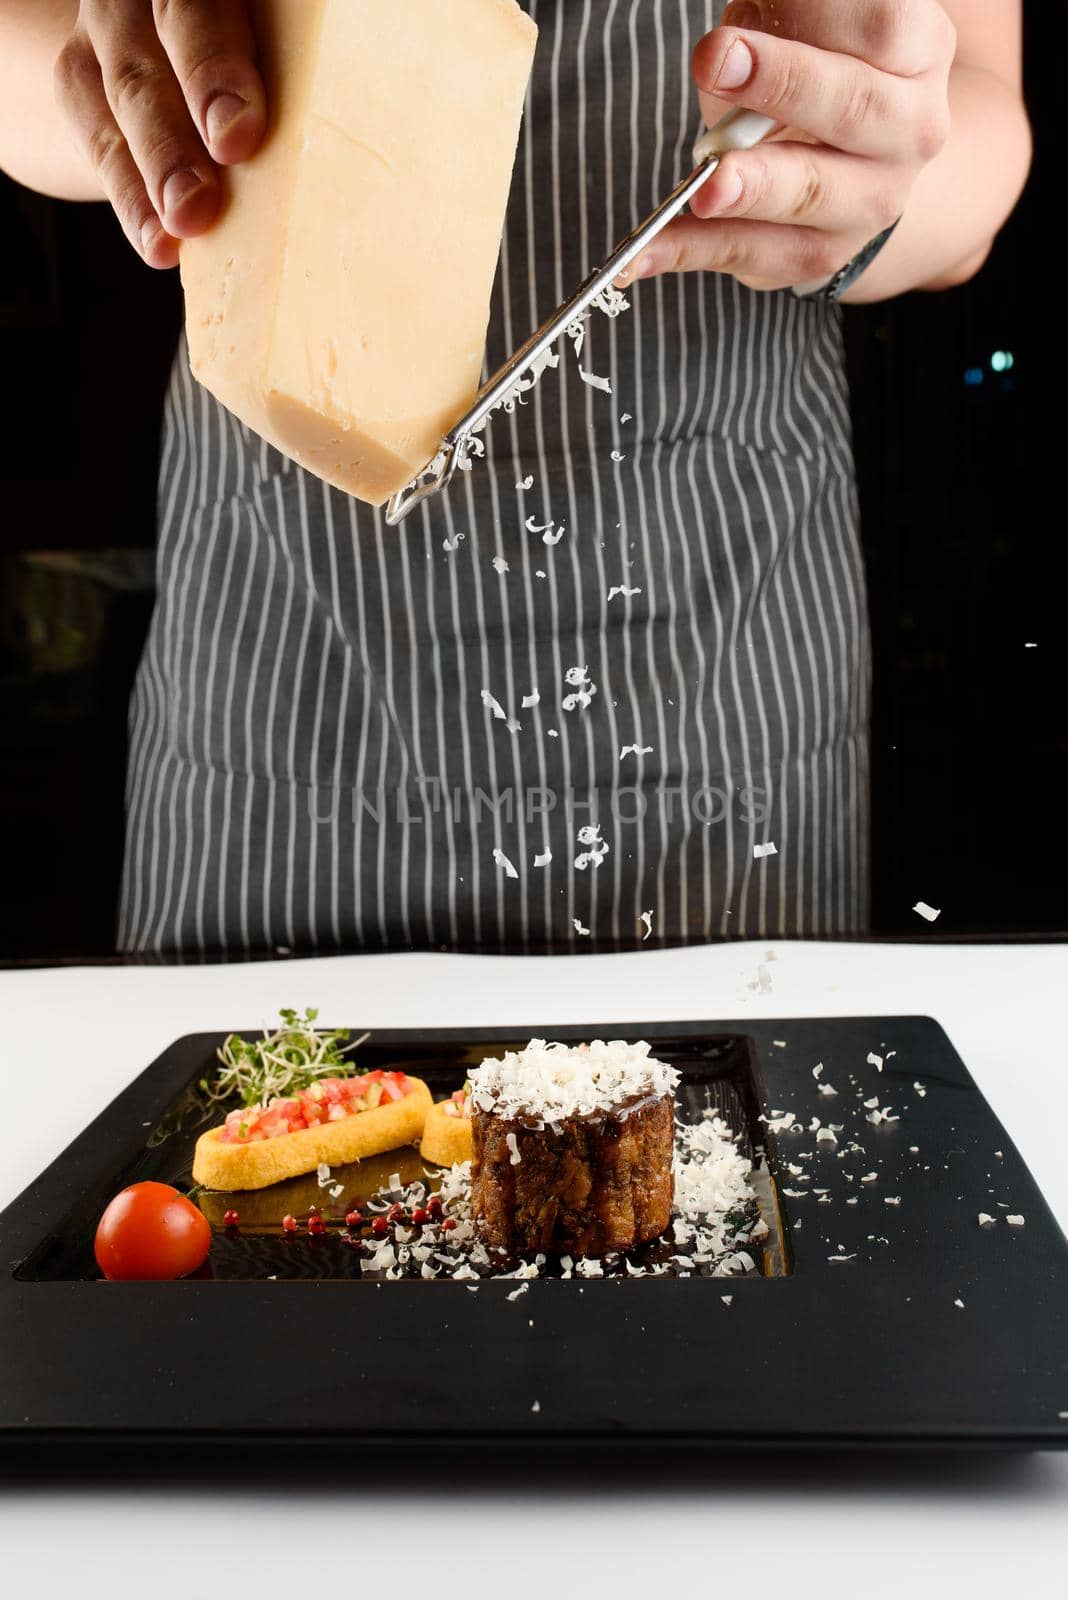 Сhef grates cheese on a gourmet restaurant dish with meat and vegetables on a black square plate.